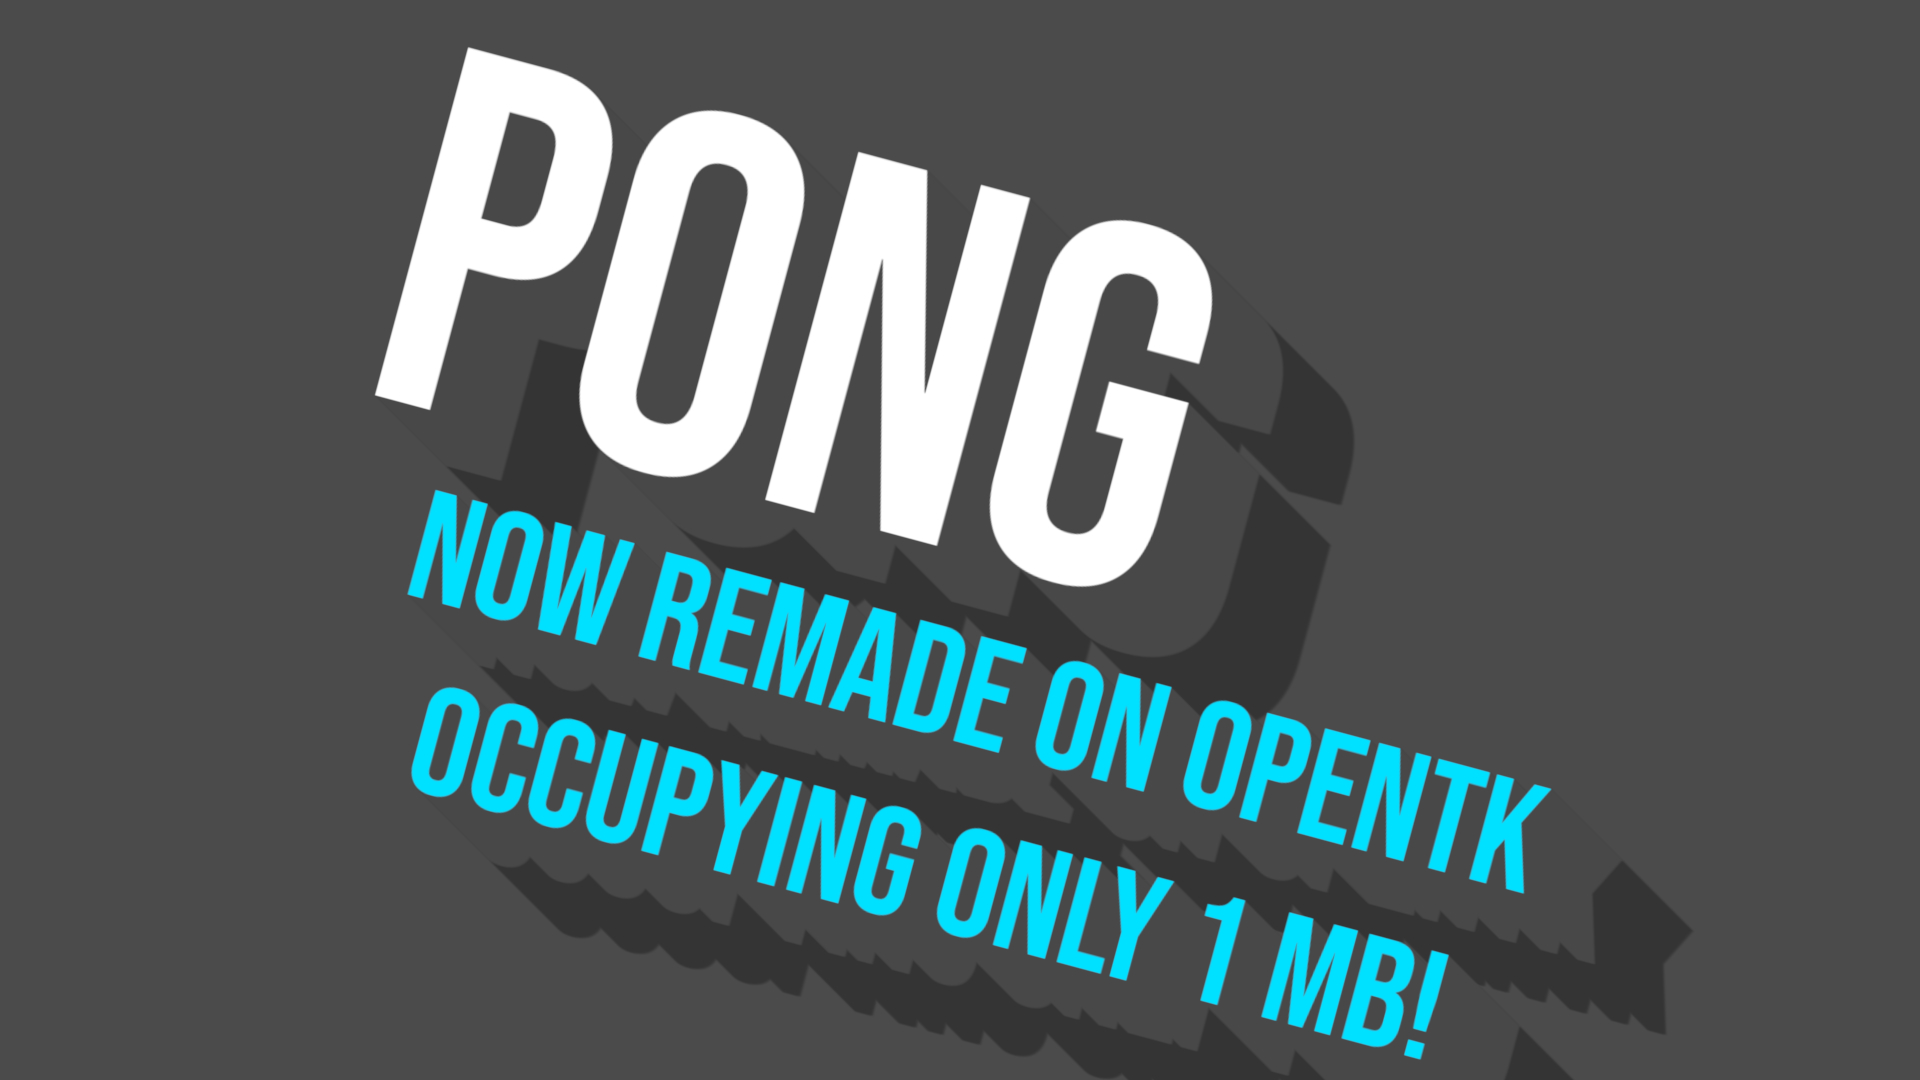 Pong (Remade on OpenTK)